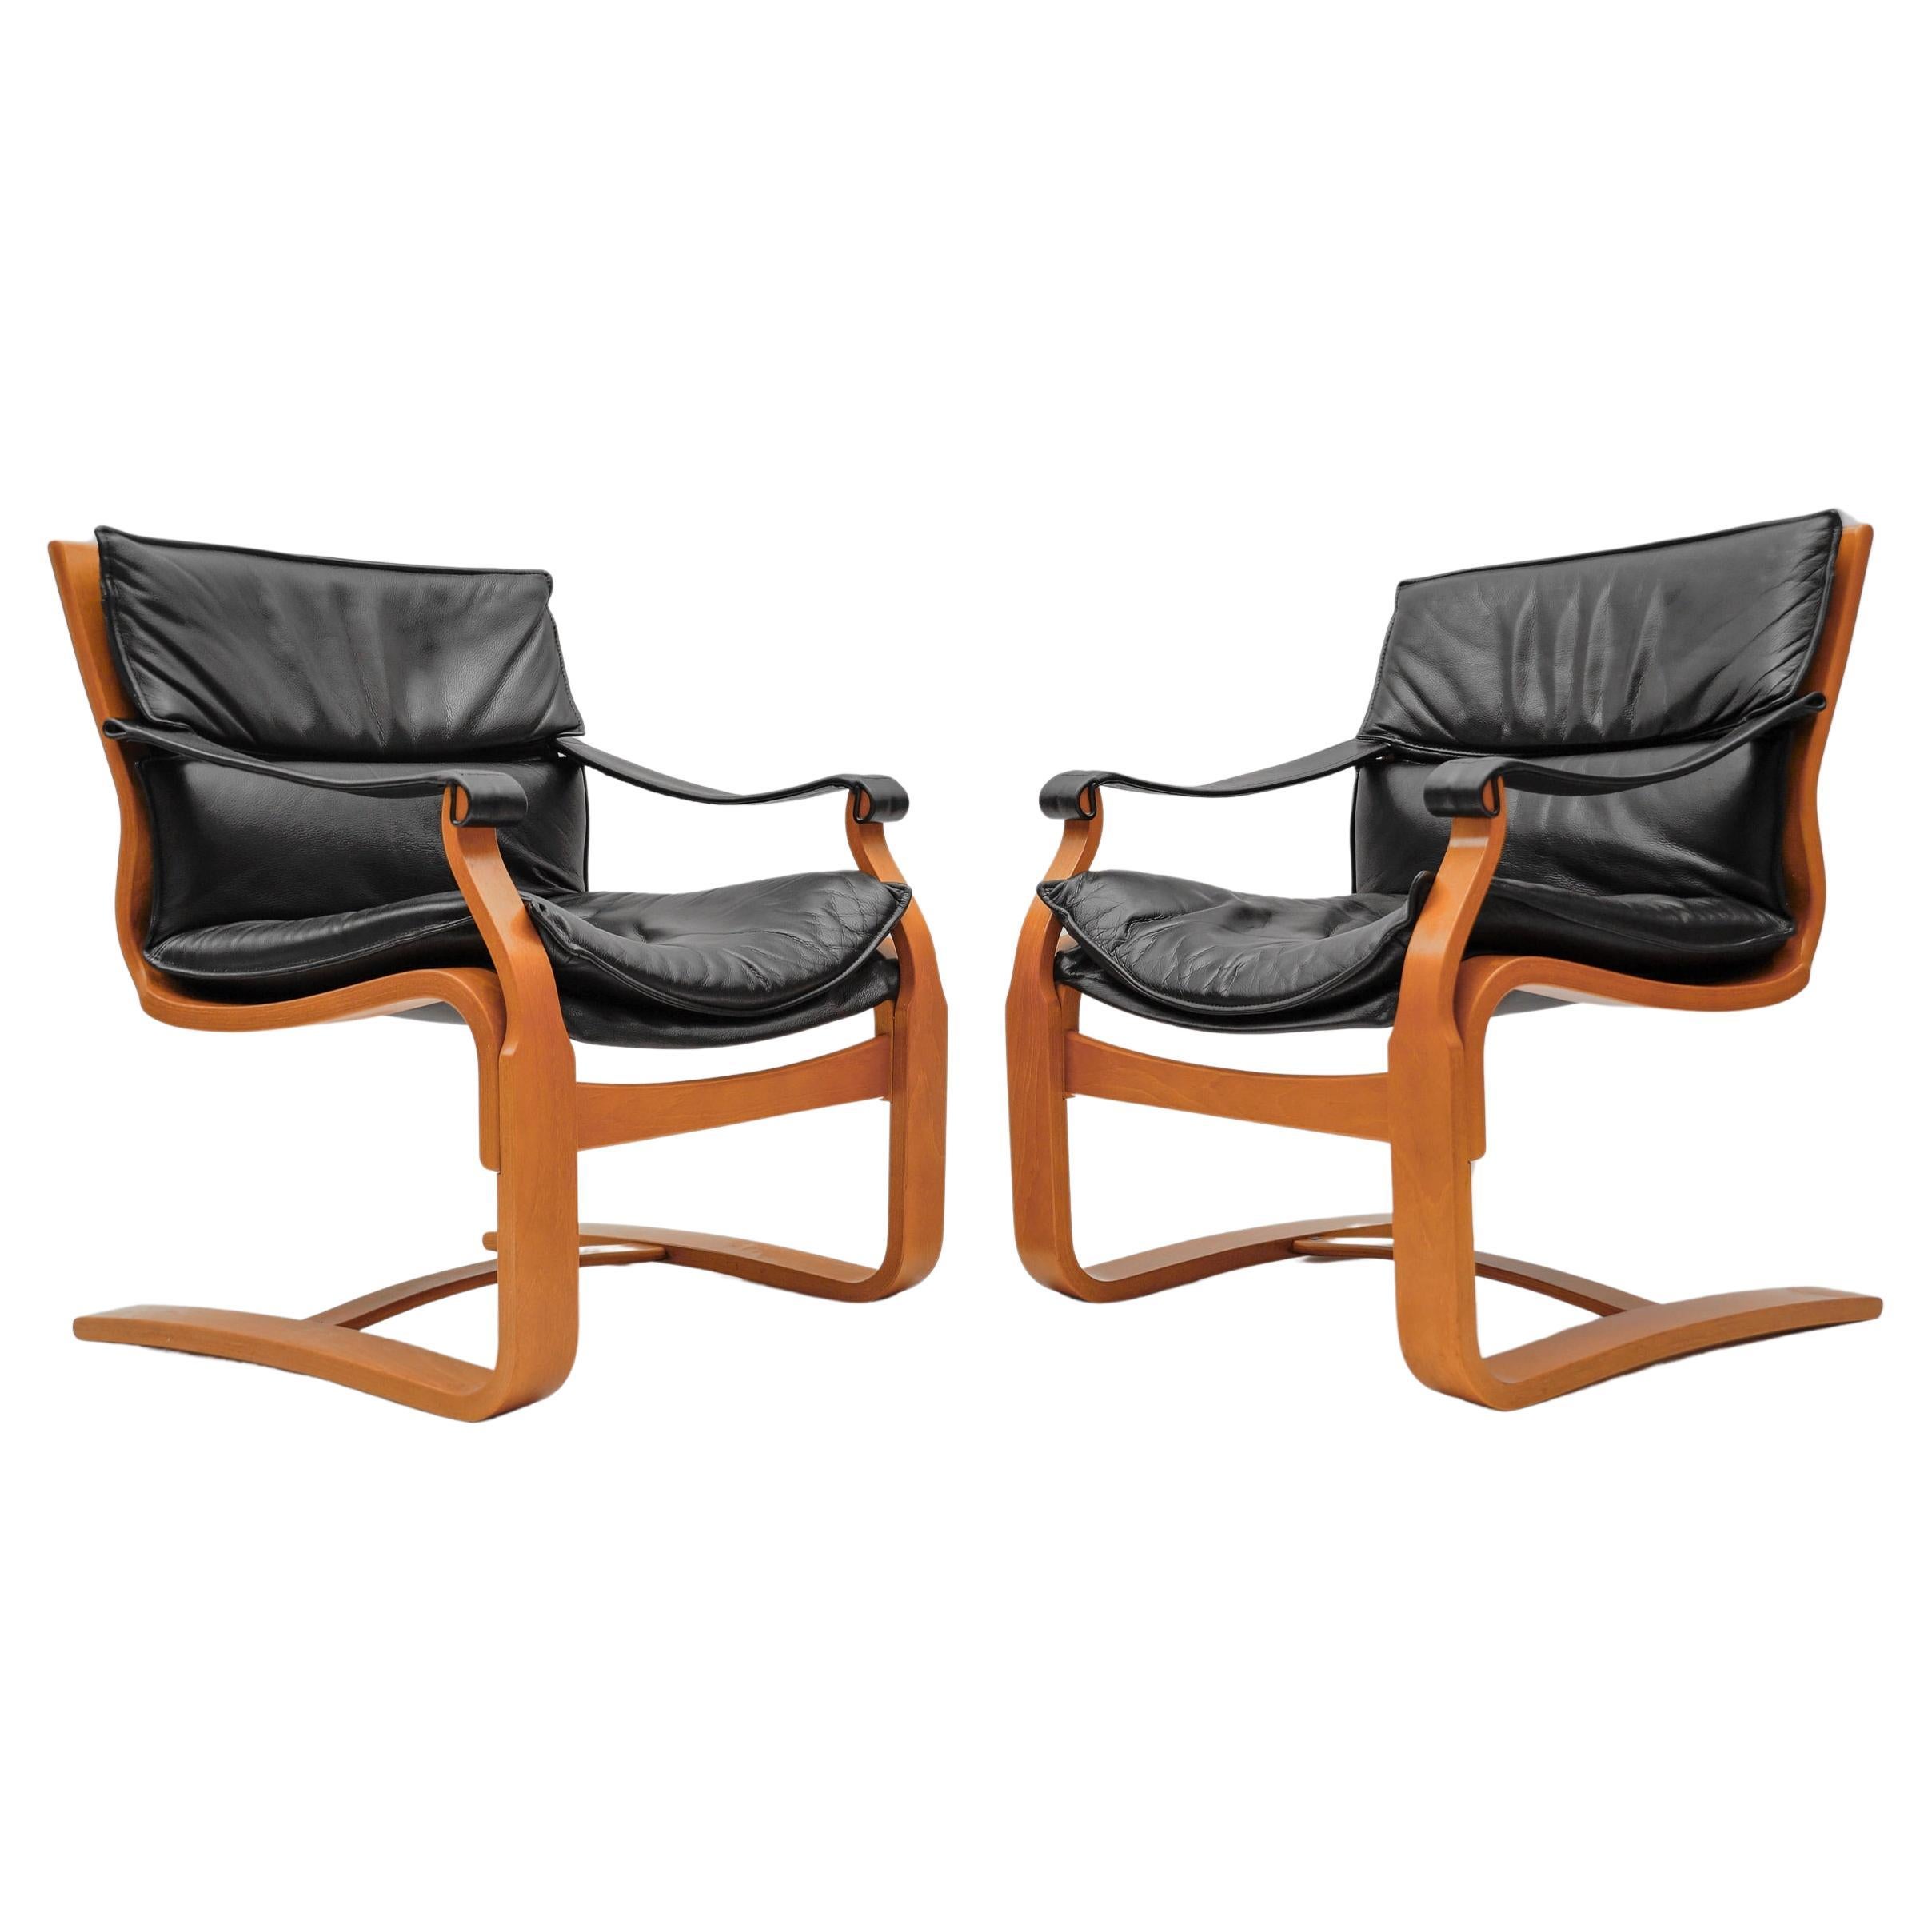 Leather Armchairs by Åke Fribytter for Nelo Kroken, Sweden, 1960s For Sale